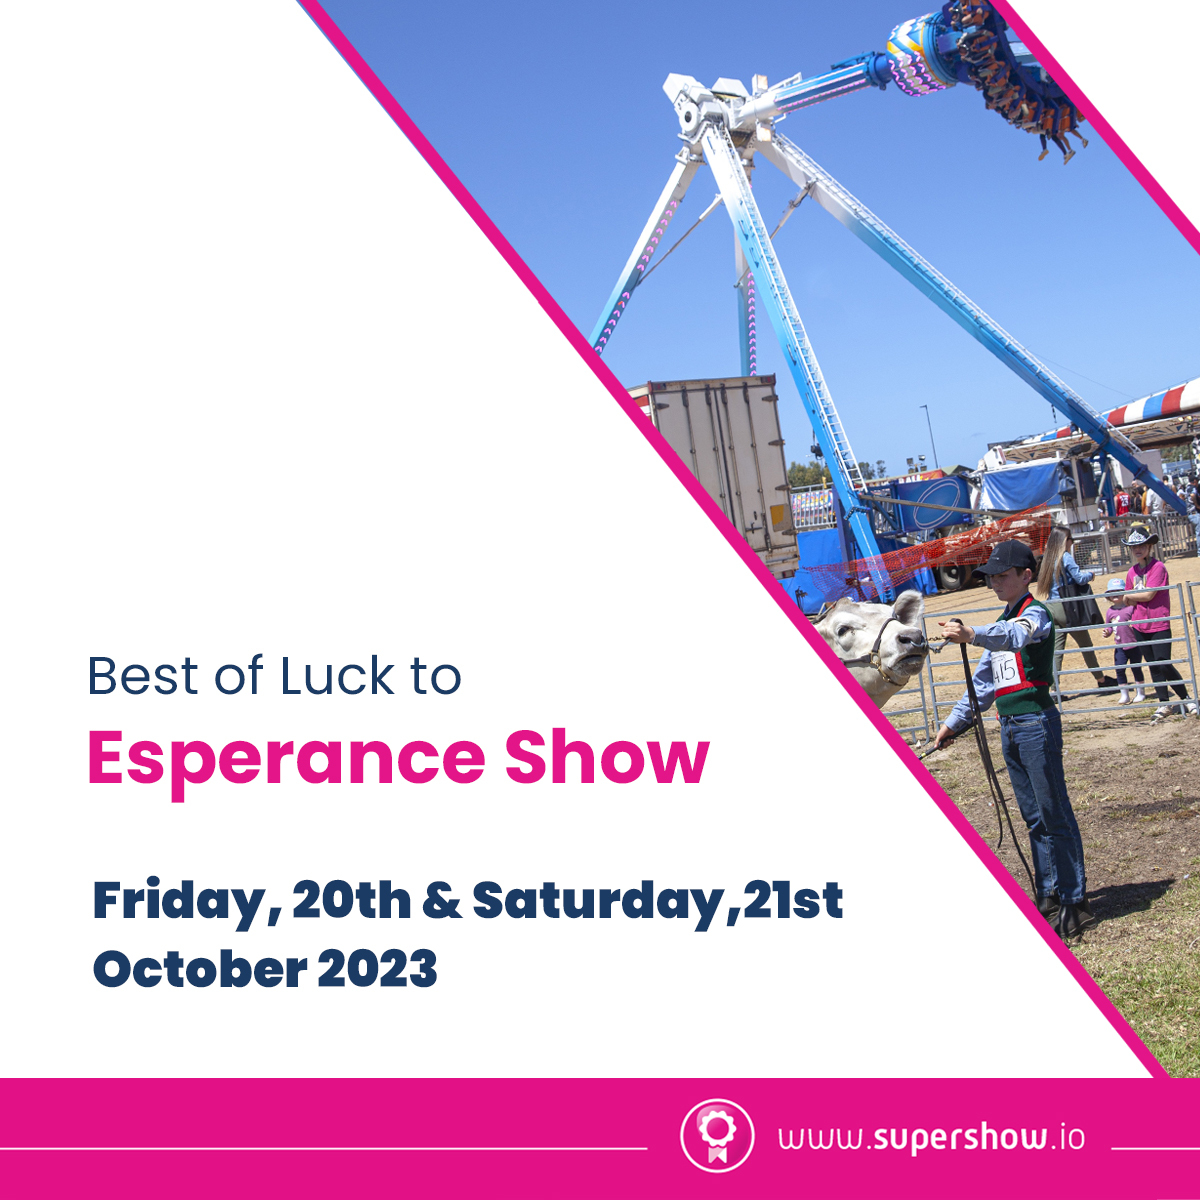 Wishing every deserved success for our client @EsperanceShow on this their 71st Show, taking place this weekend! Visit esperanceshow.com.au for full details, timetable and updates. #esperanceshow #asa #agrishows23 #agrishow #supershow #showmanagement